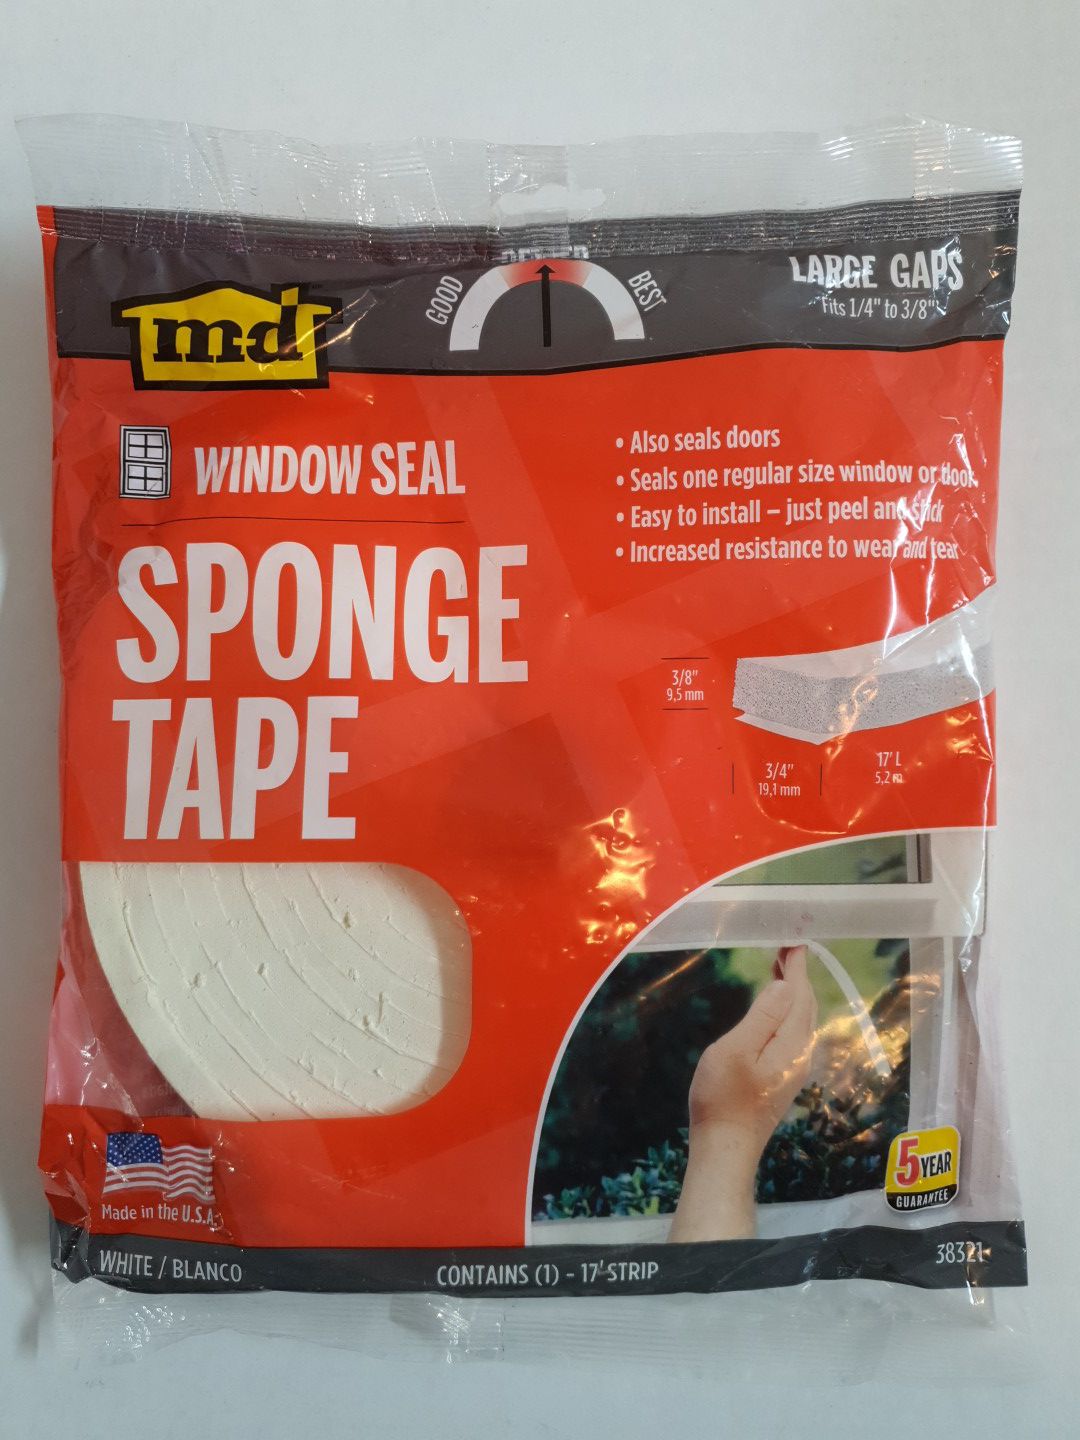 MD 17 ft Sponge window Seal air sealing tape, Large Gaps, fits 1/4" to 3/8" , NEW.. Condition is "New". Same Day Shipping